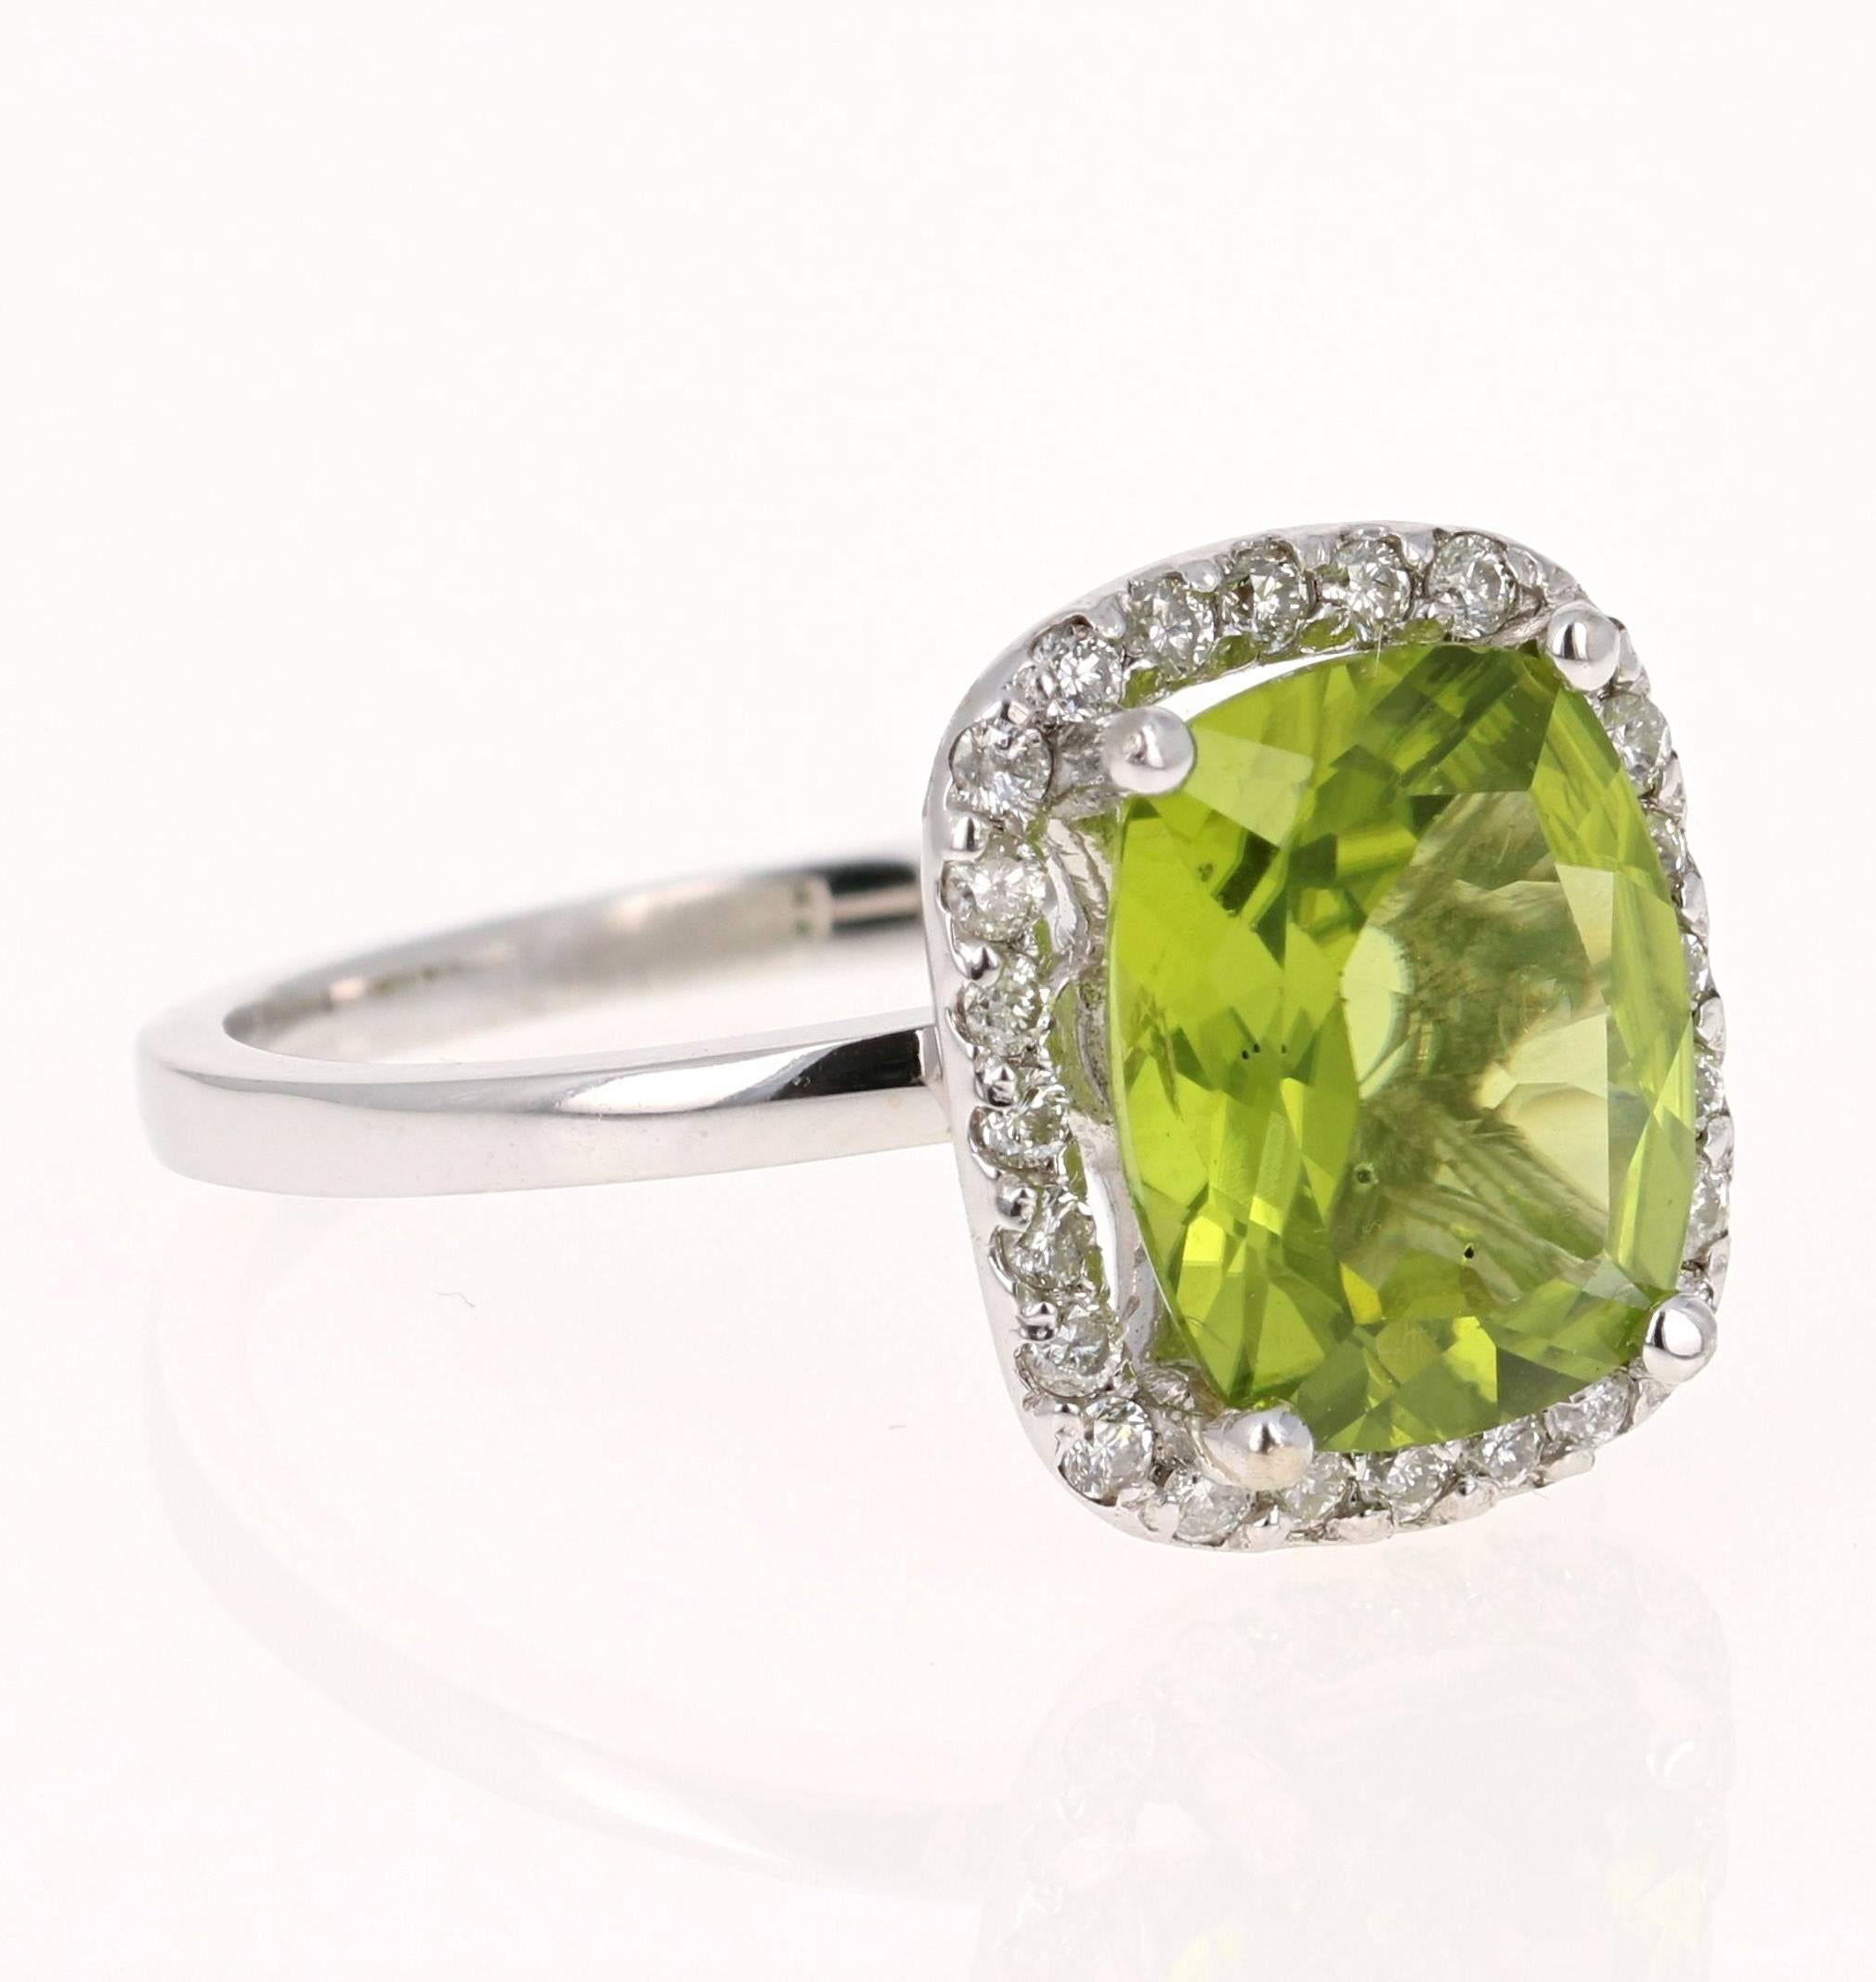 This beautiful ring has a Cushion Cut Peridot in the center that weighs 3.67 carats. The ring is surrounded by a gorgeous halo of 24 Round Cut Diamonds that weigh 0.37 carats. The total carat weight of the ring is 4.04 carats. The setting is crafted